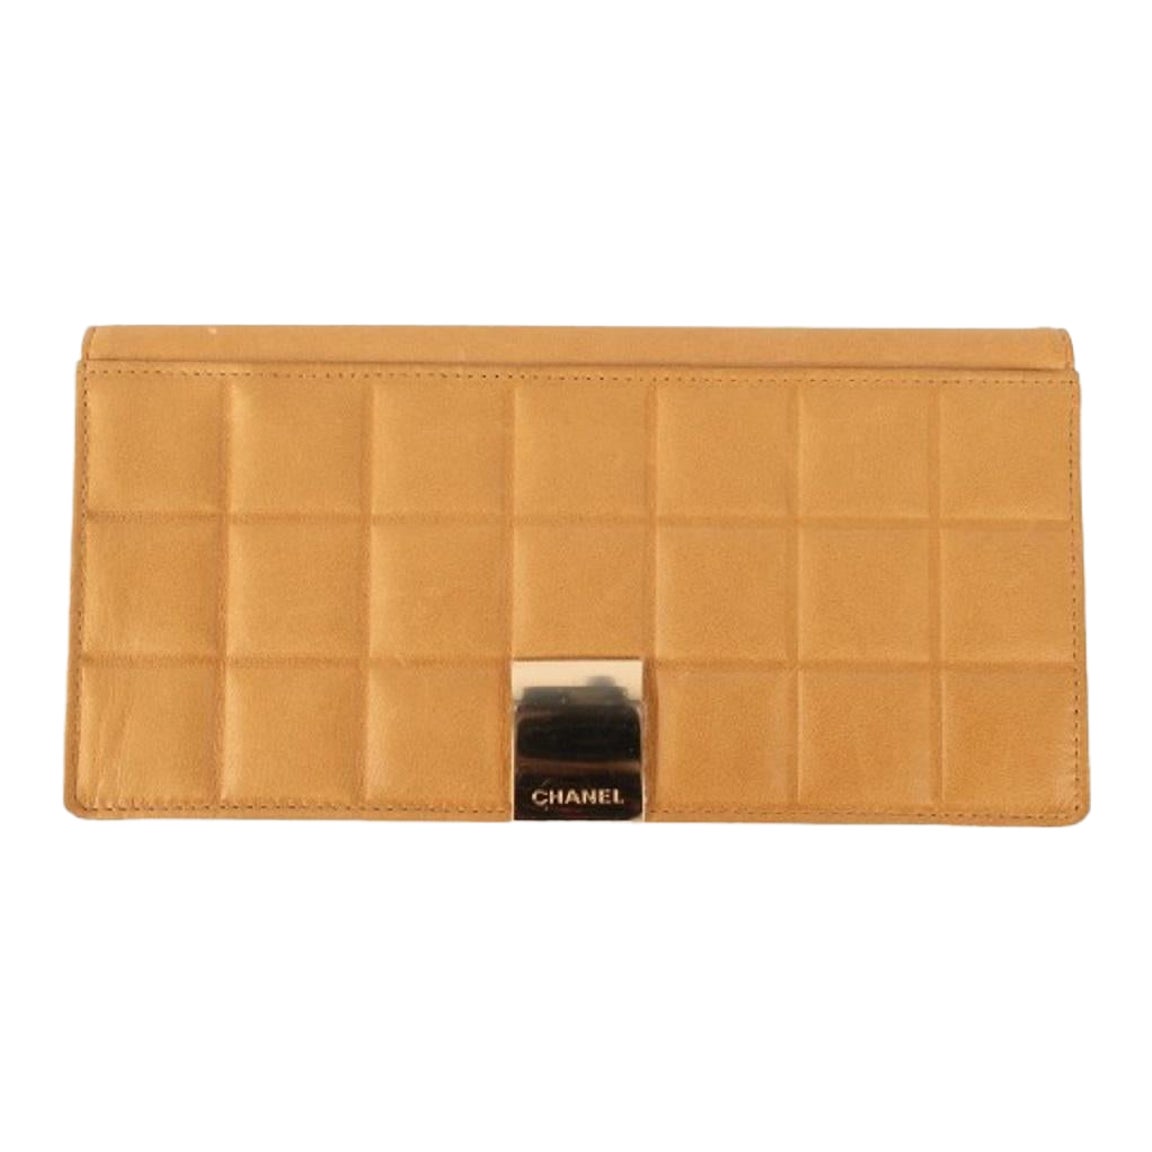 Chanel Golden Metal and Beige Leather Wallet, 2002/2003 For Sale